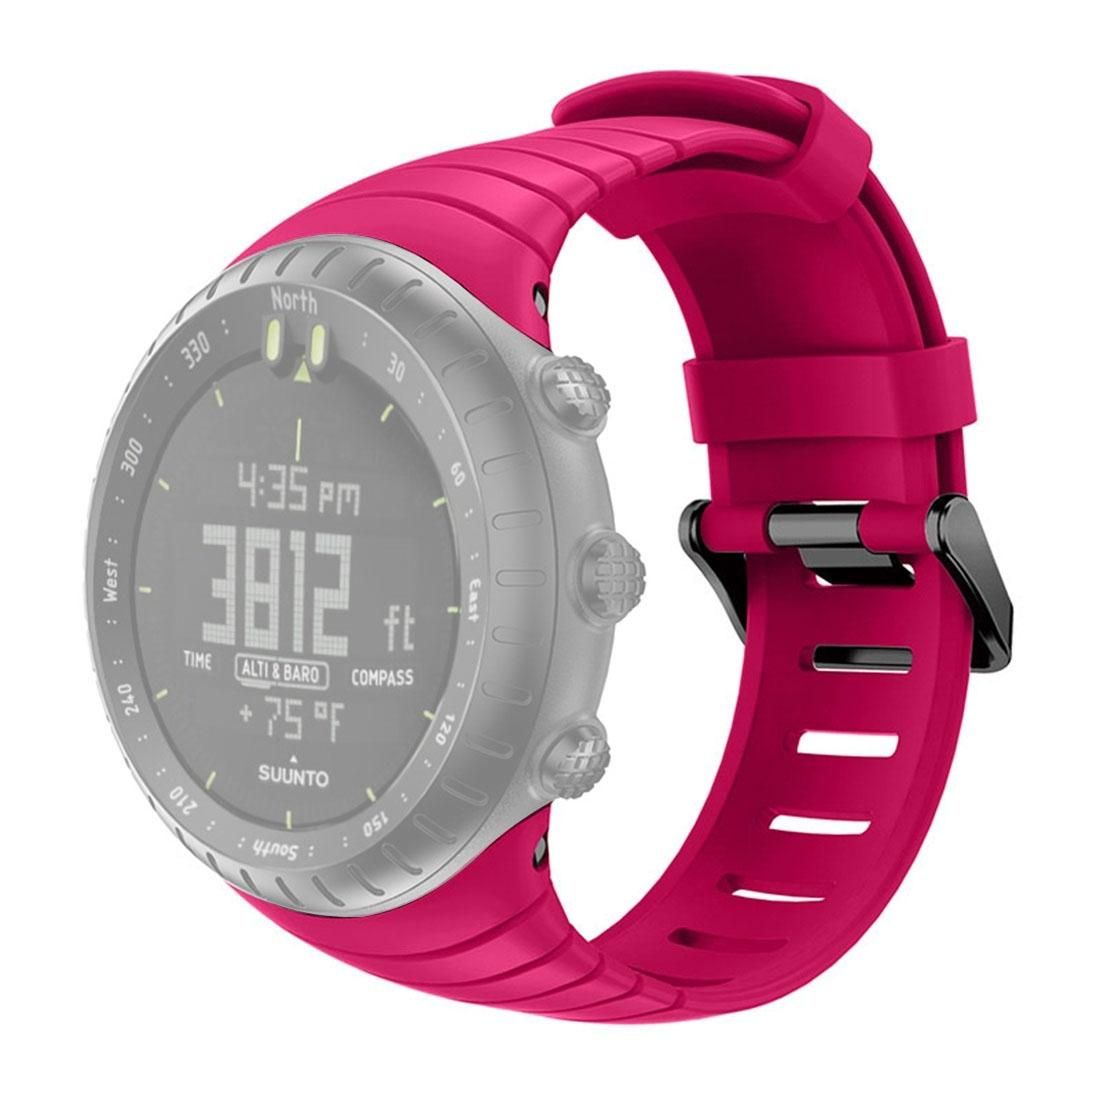 Smart Watch Silicone Wrist Strap Watchband for Suunto Core (Rose Red)